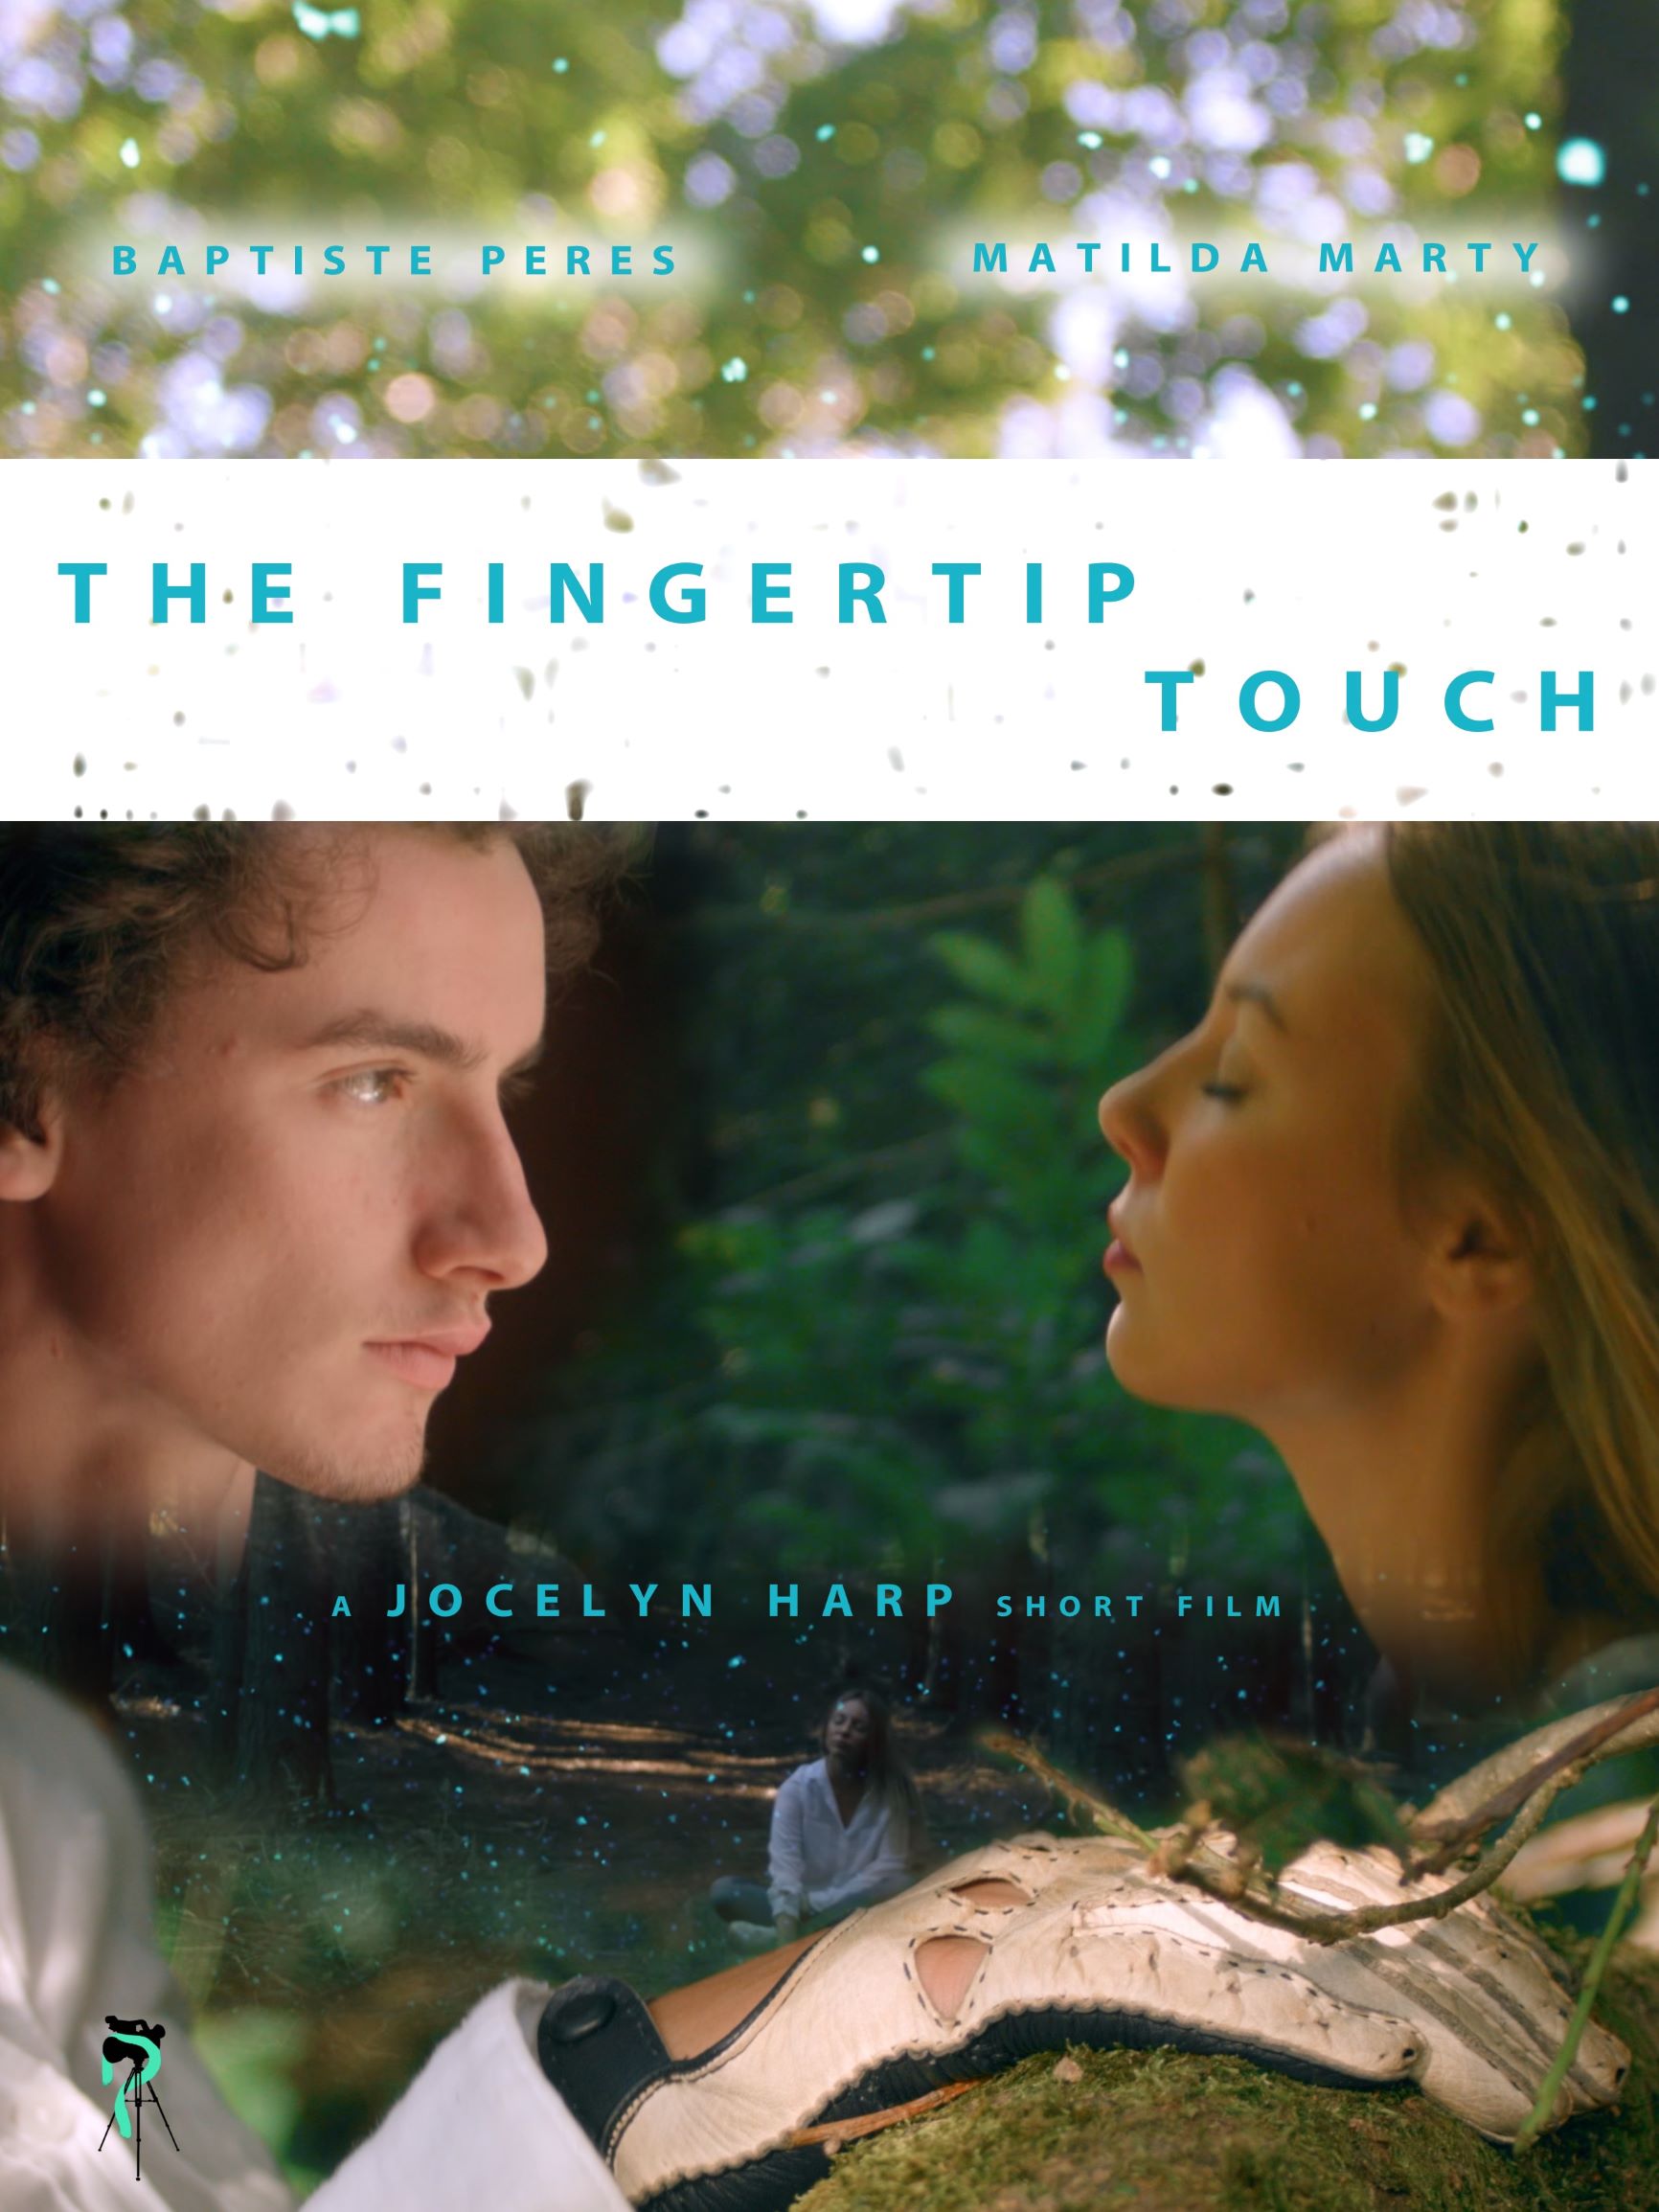 The Fingertip Touch